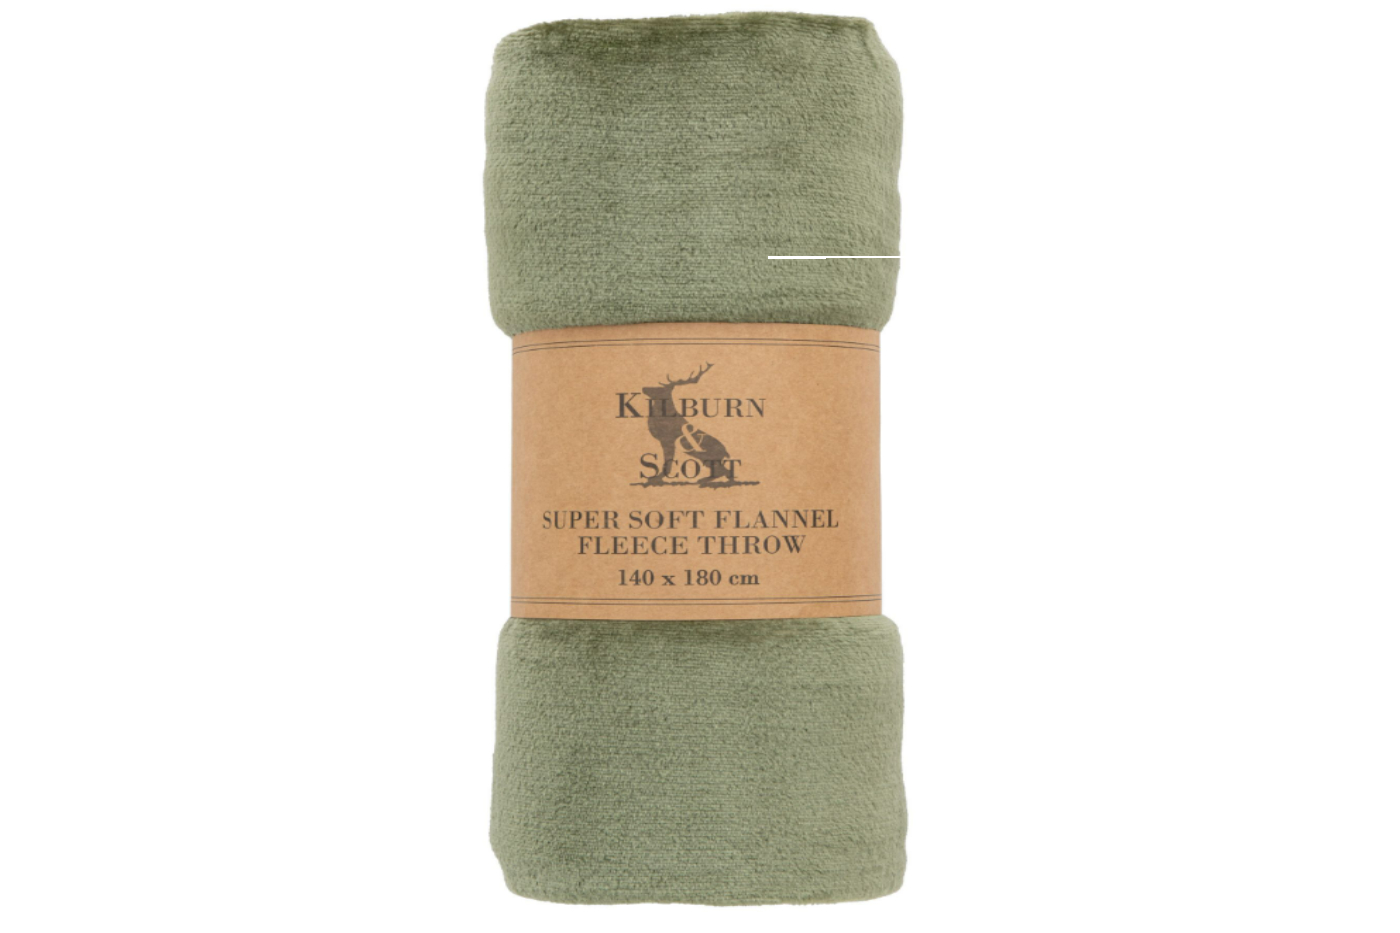 View Olive Soft Touch Cosy Rolled Flannel Fleece Throw 1800 x 1400mm Ideal For Beds Or Sofas Stitched Piped Edging Adds Texture And Warmth information